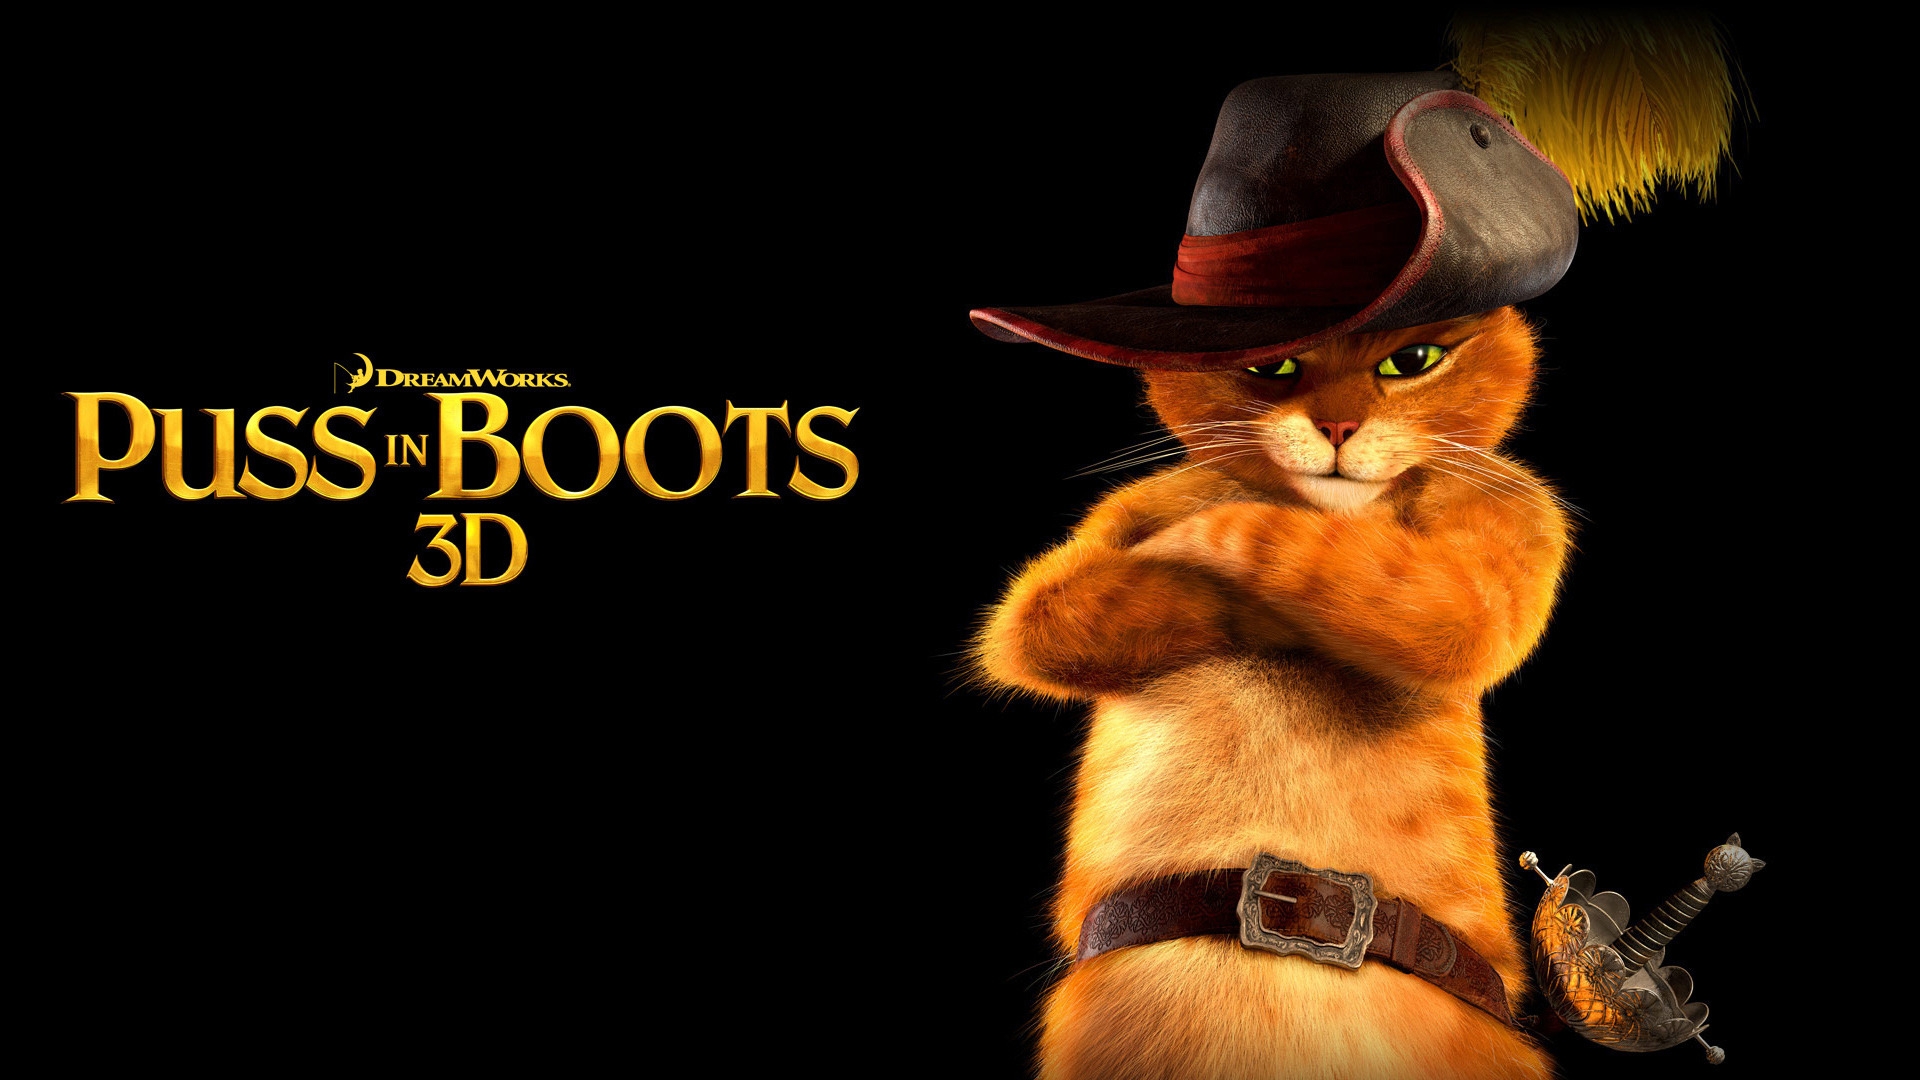 Puss in Boots 3D for 1920 x 1080 HDTV 1080p resolution